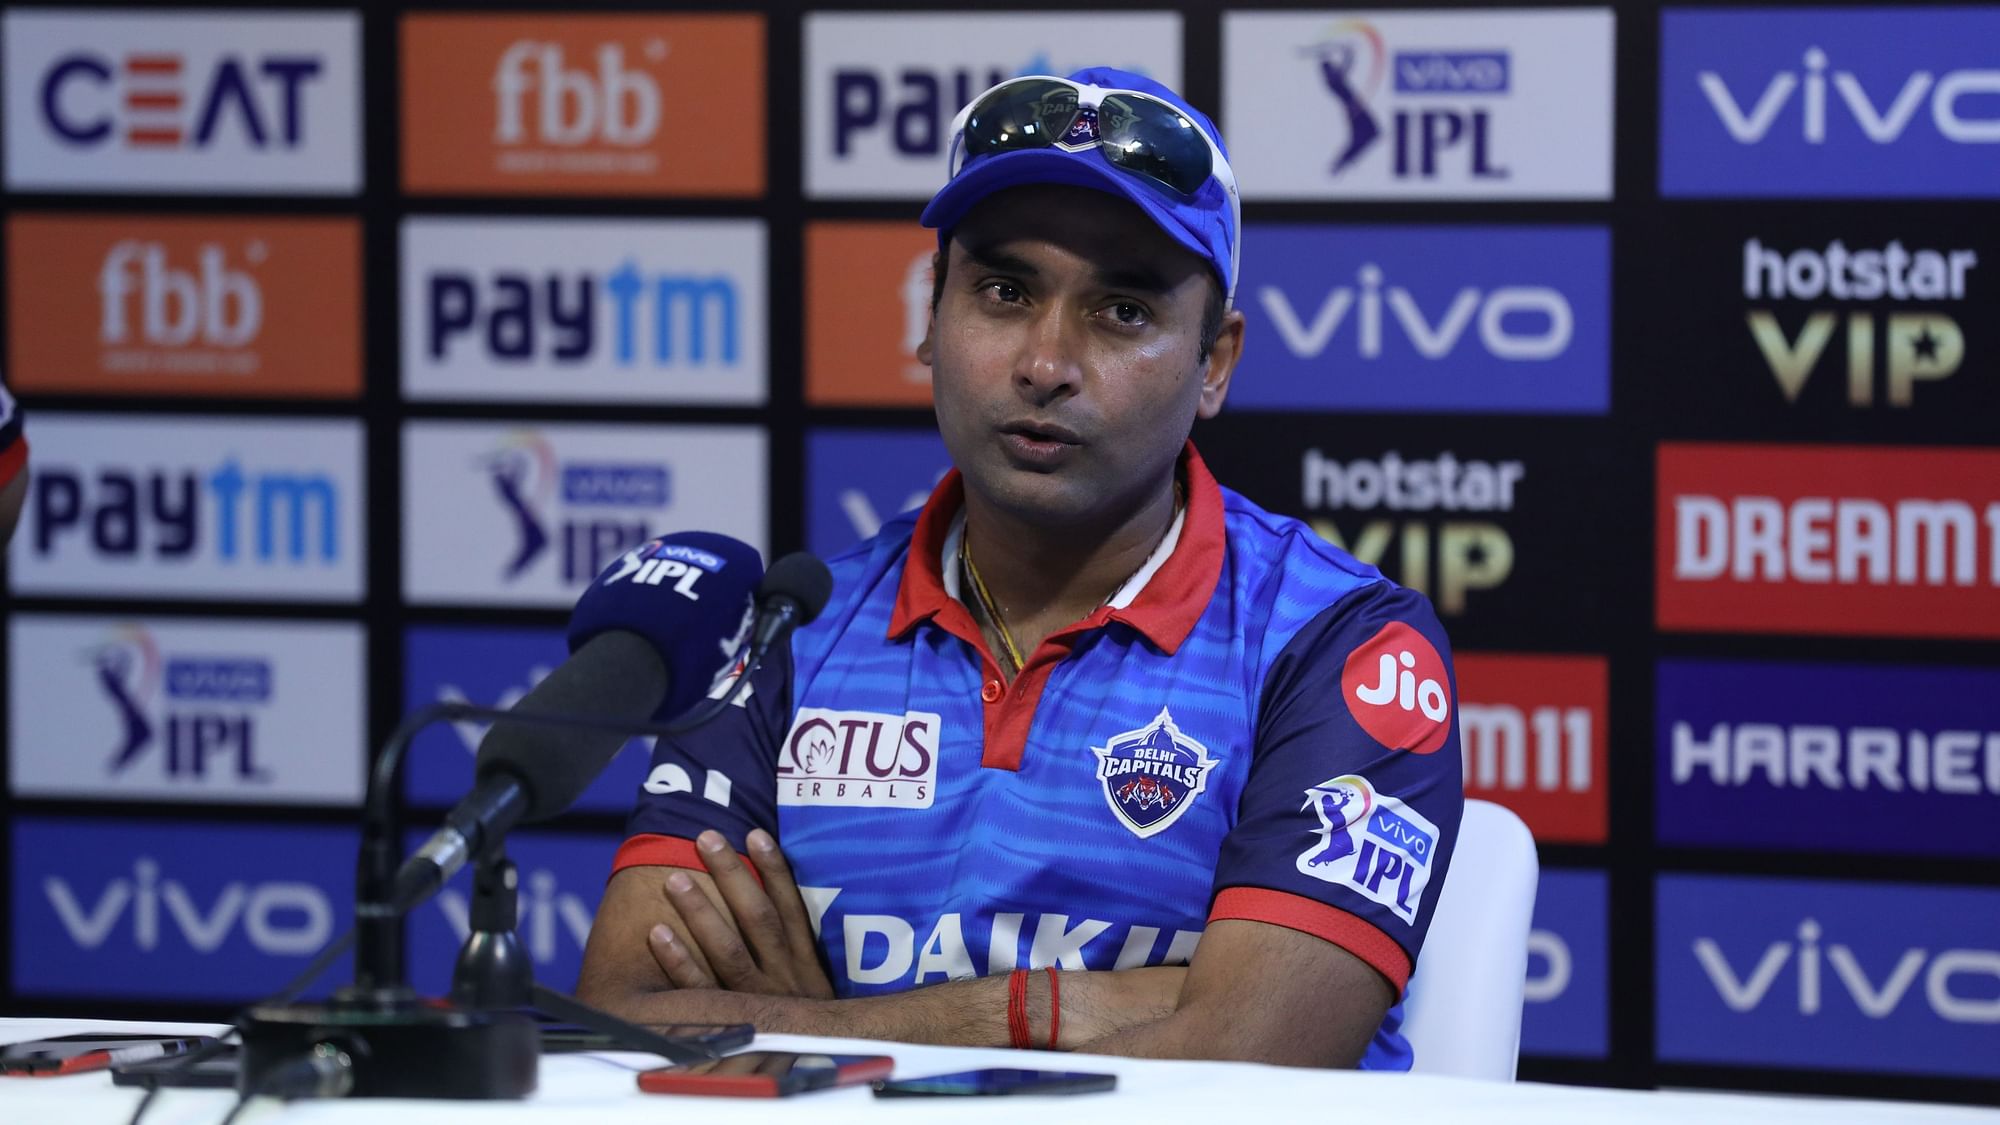 Delhi Capitals leg spinner Amit Mishra says after the IPL begins, players will have a better idea of conditions.